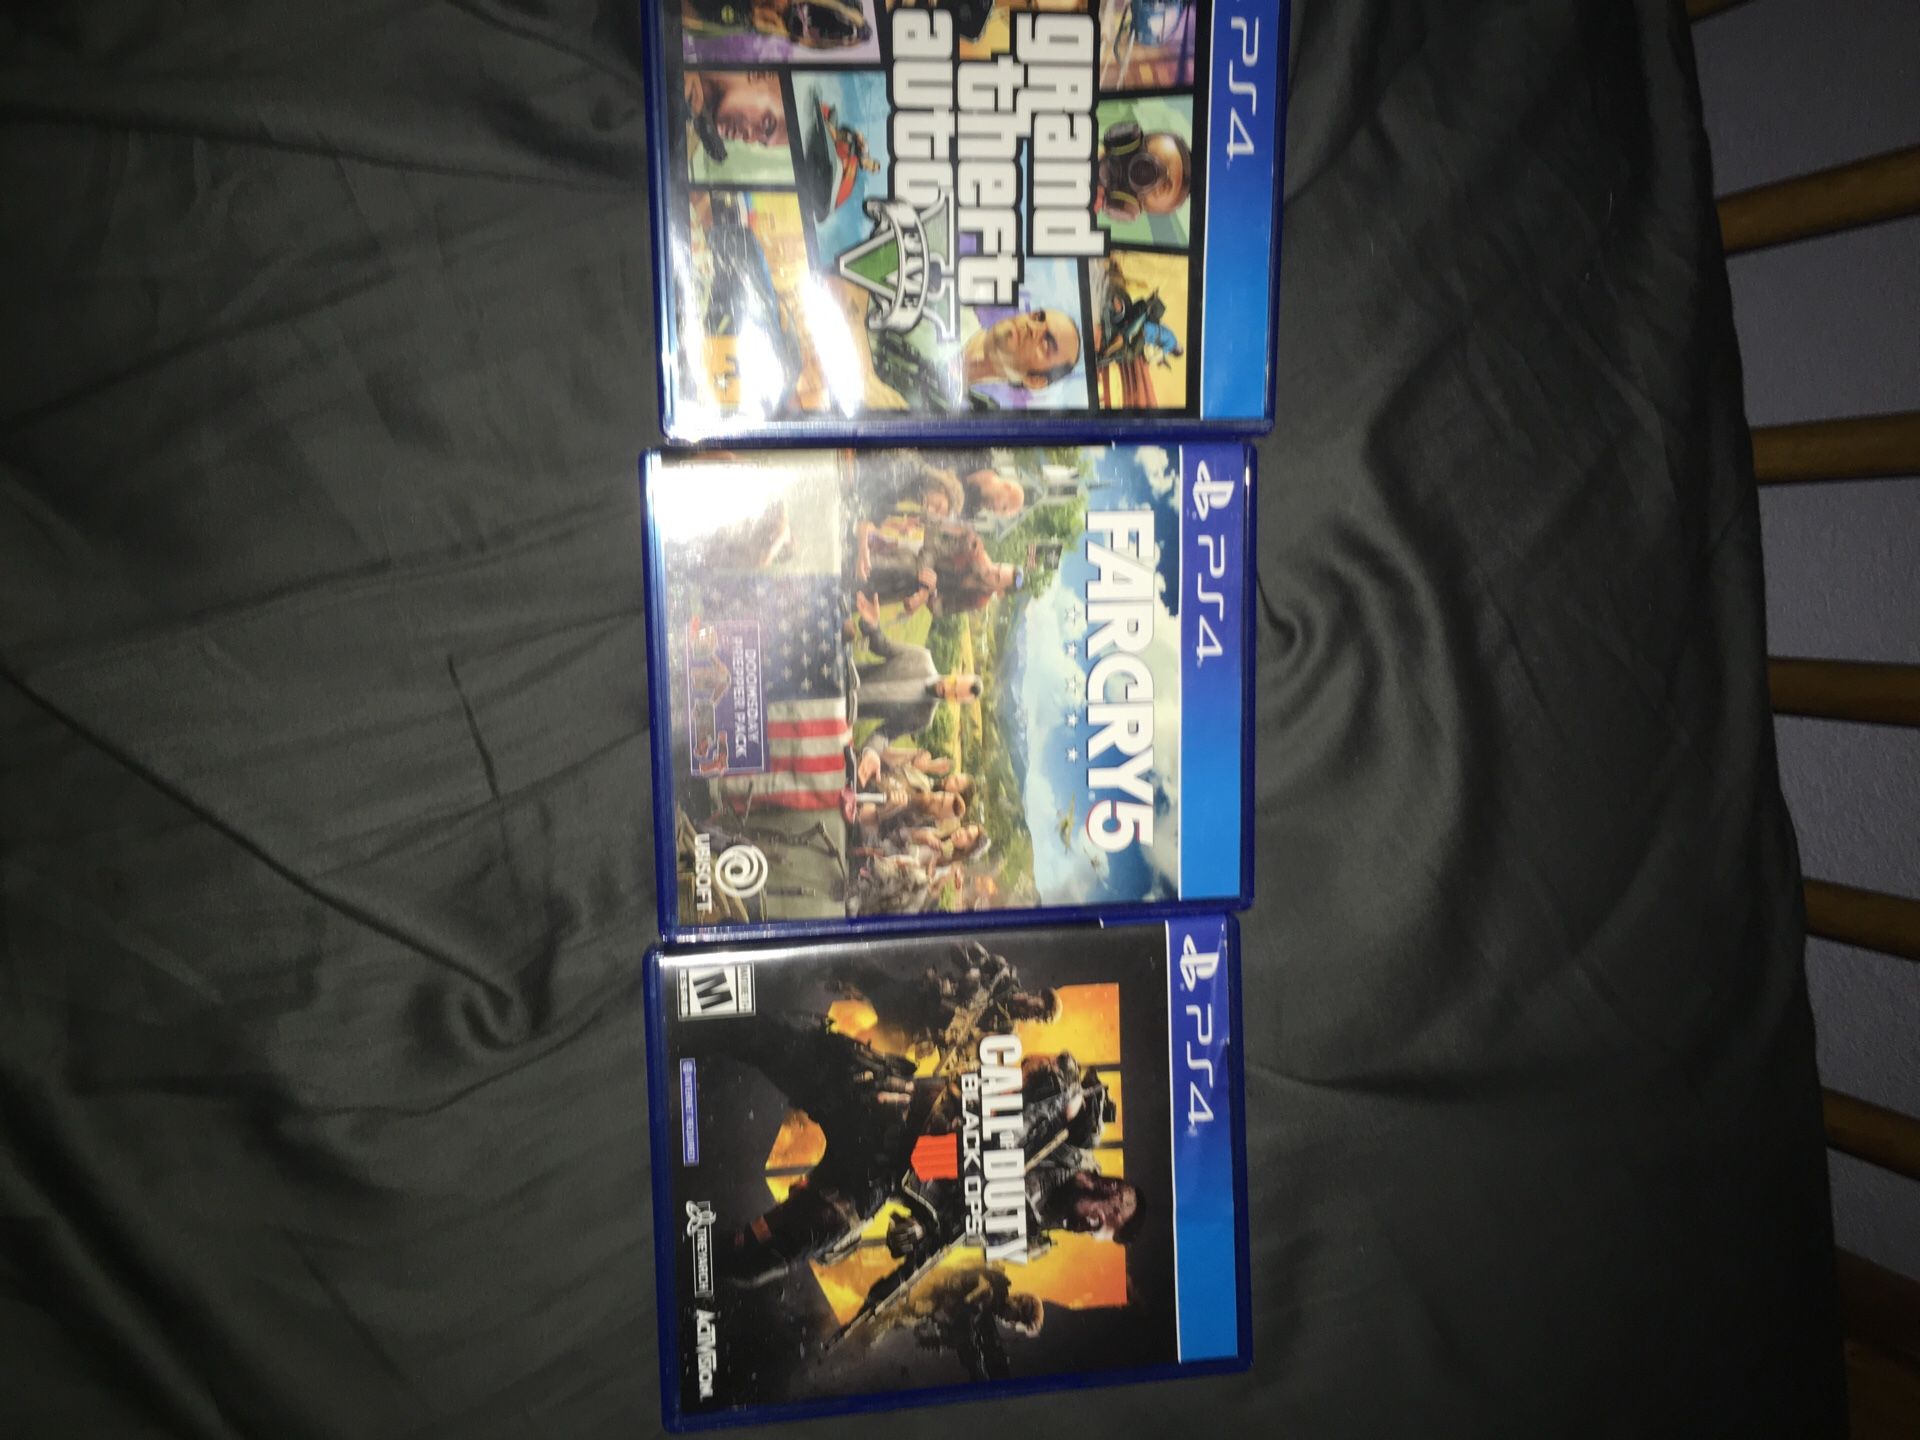 PS4 video games